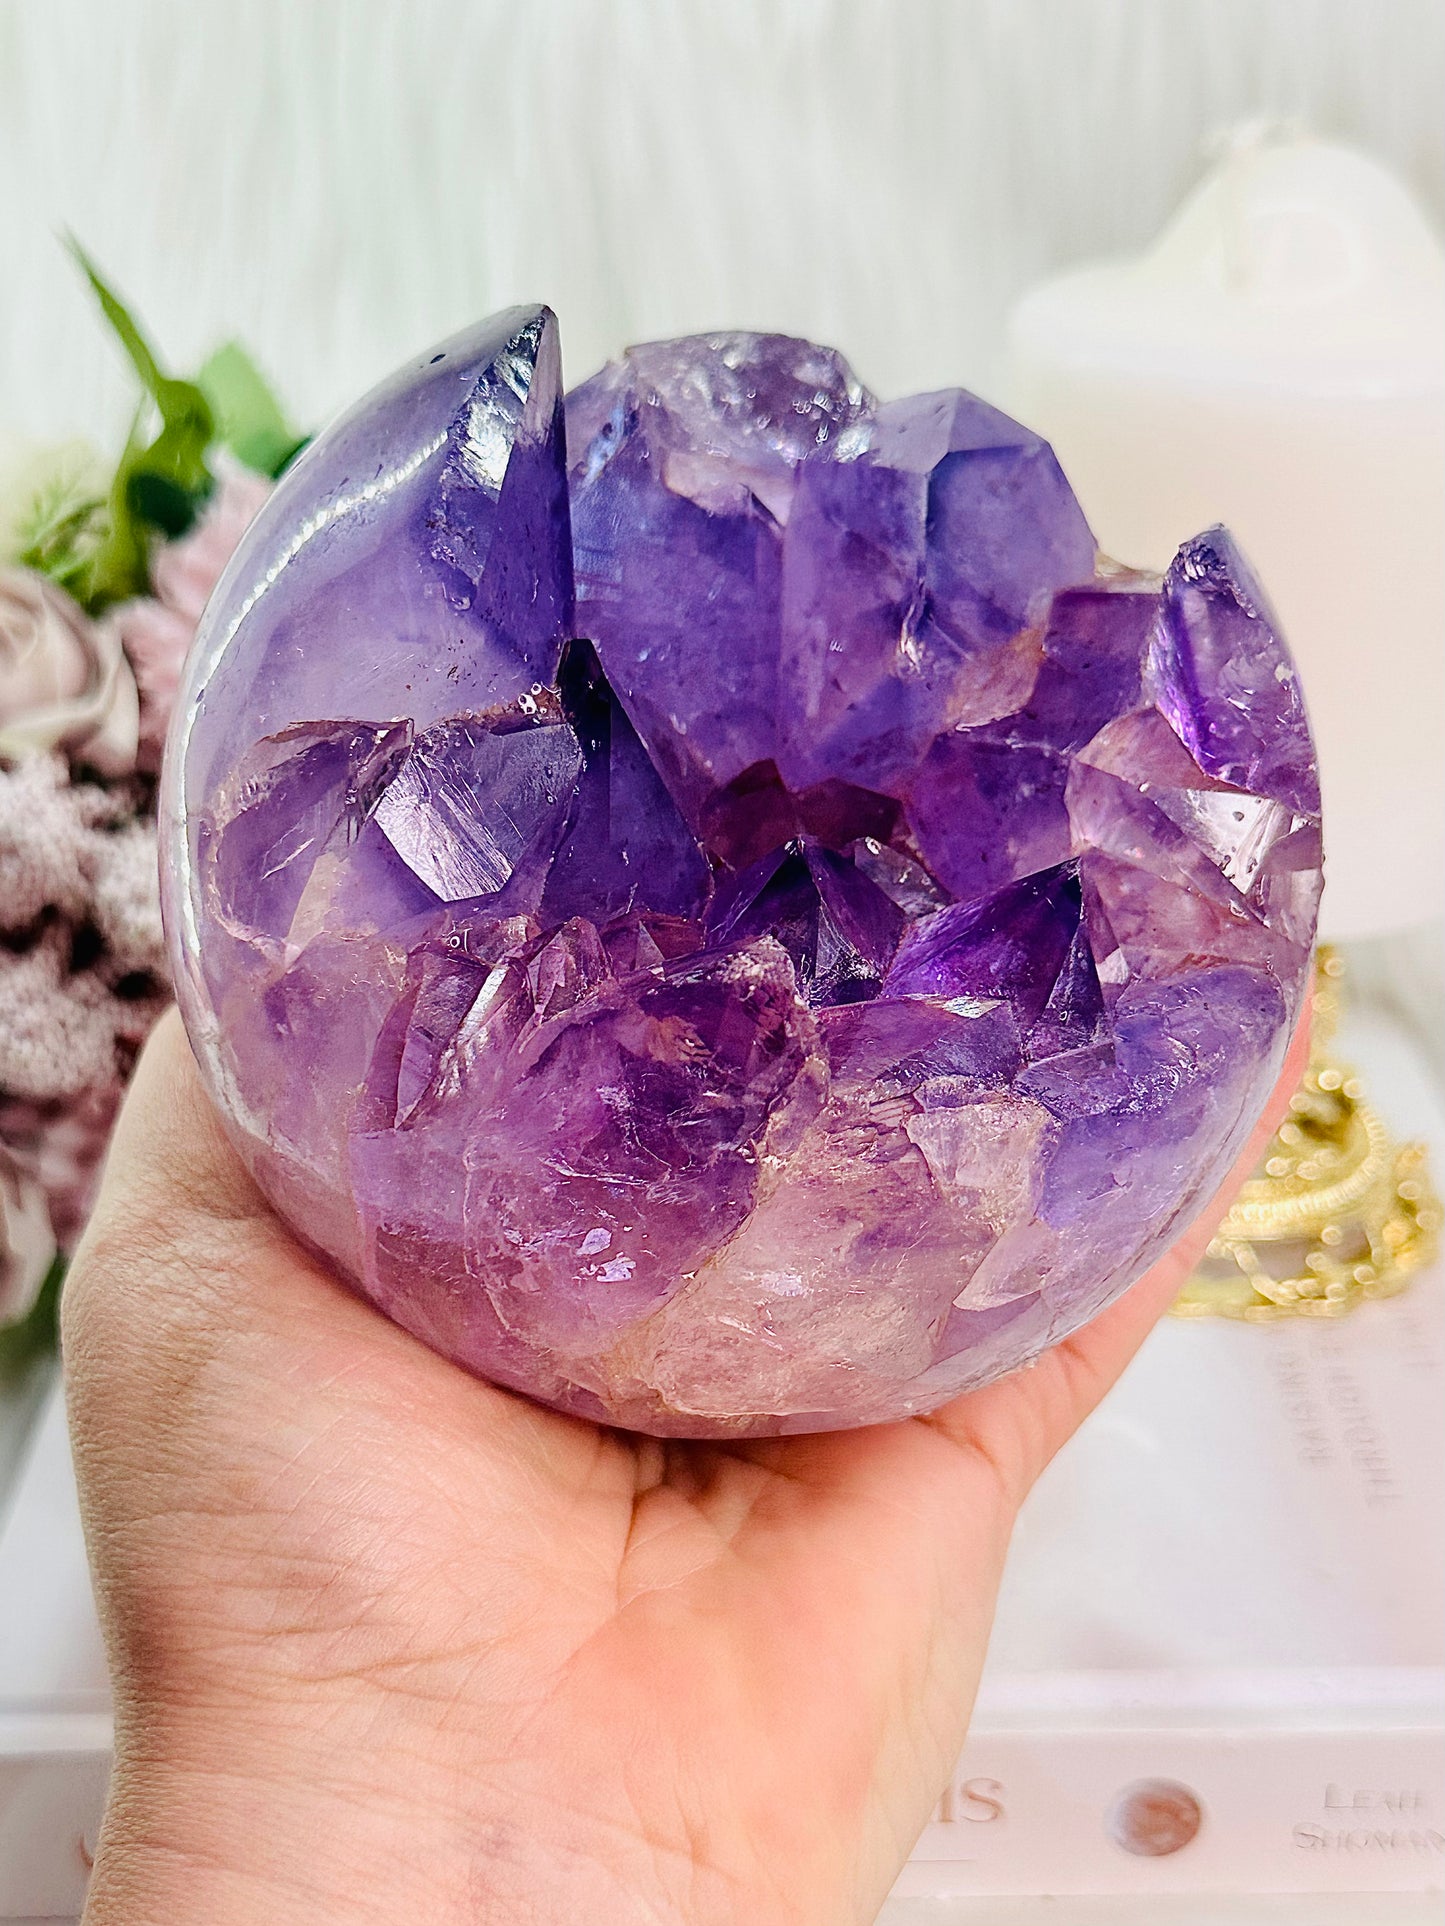 ⚜️ SALE ⚜️Classy & Fabulous ~ Absolutely HUGE Stunning MASTERPIECE!!! Glorious 1.32KG Amethyst Druzy Sphere with Large Points & Rainbows From Brazil On Stand